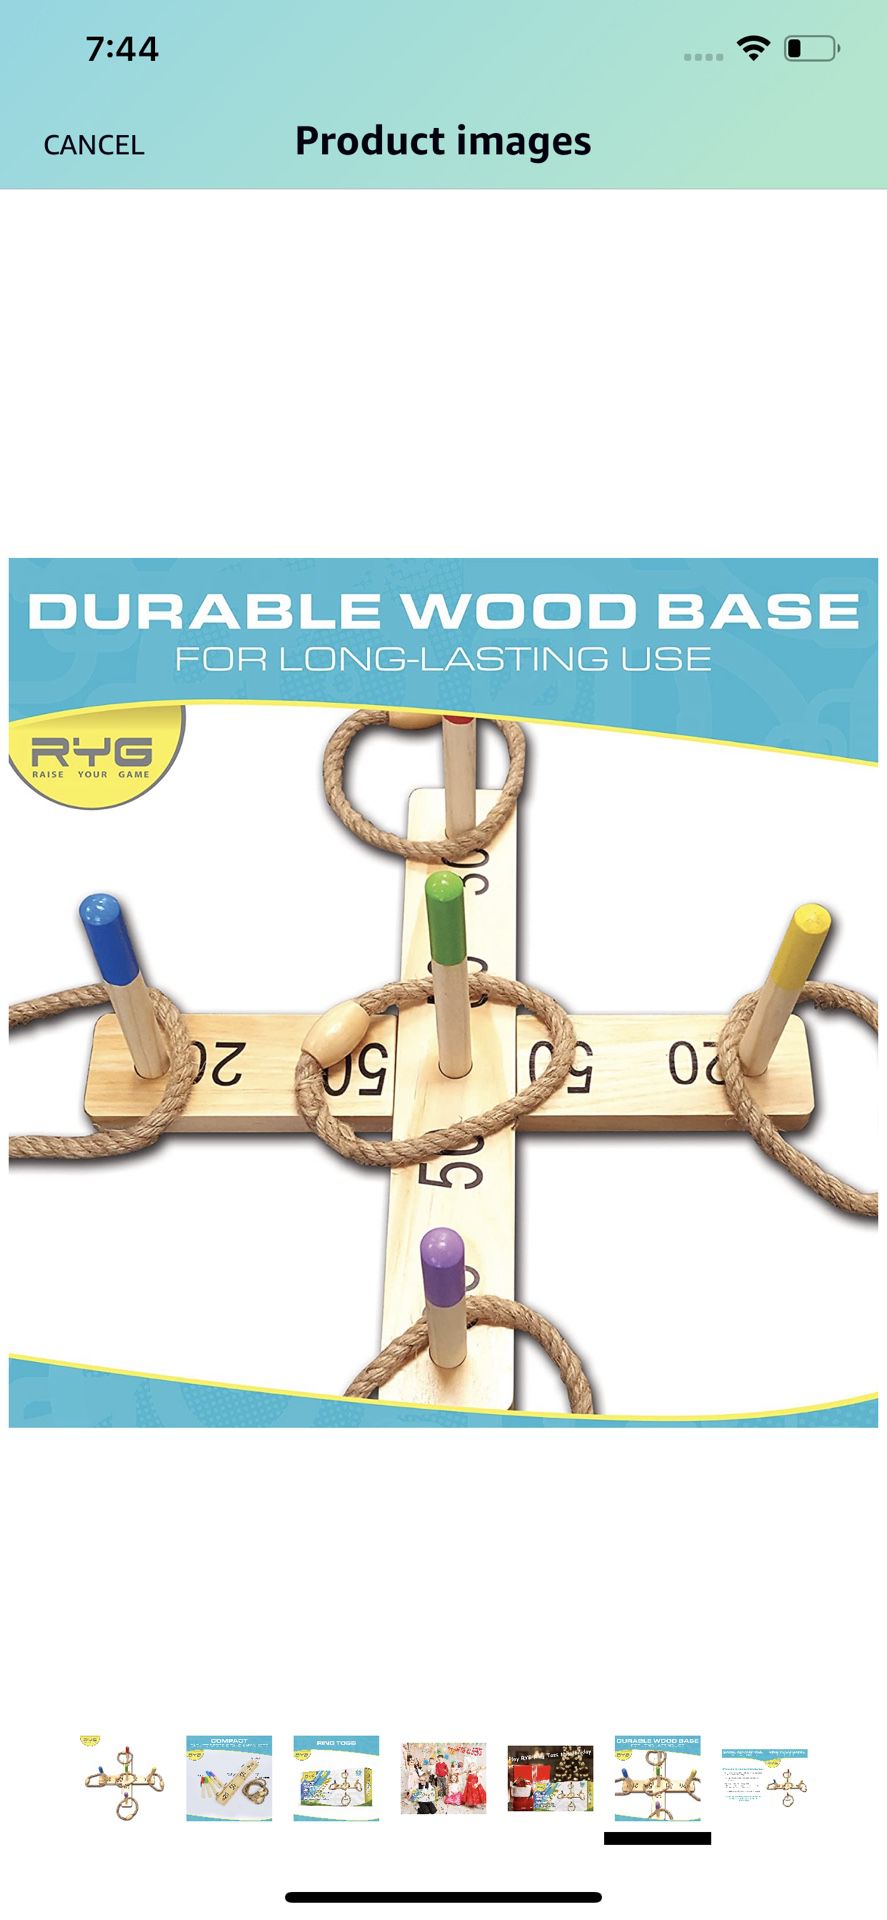 Wooden Ring Toss Game Set, Durable Wood Base, 5 Wood Pegs, 5 Rope Rings, Portable Indoor and Outdoor Family Quoits Games, for Kids & Adults